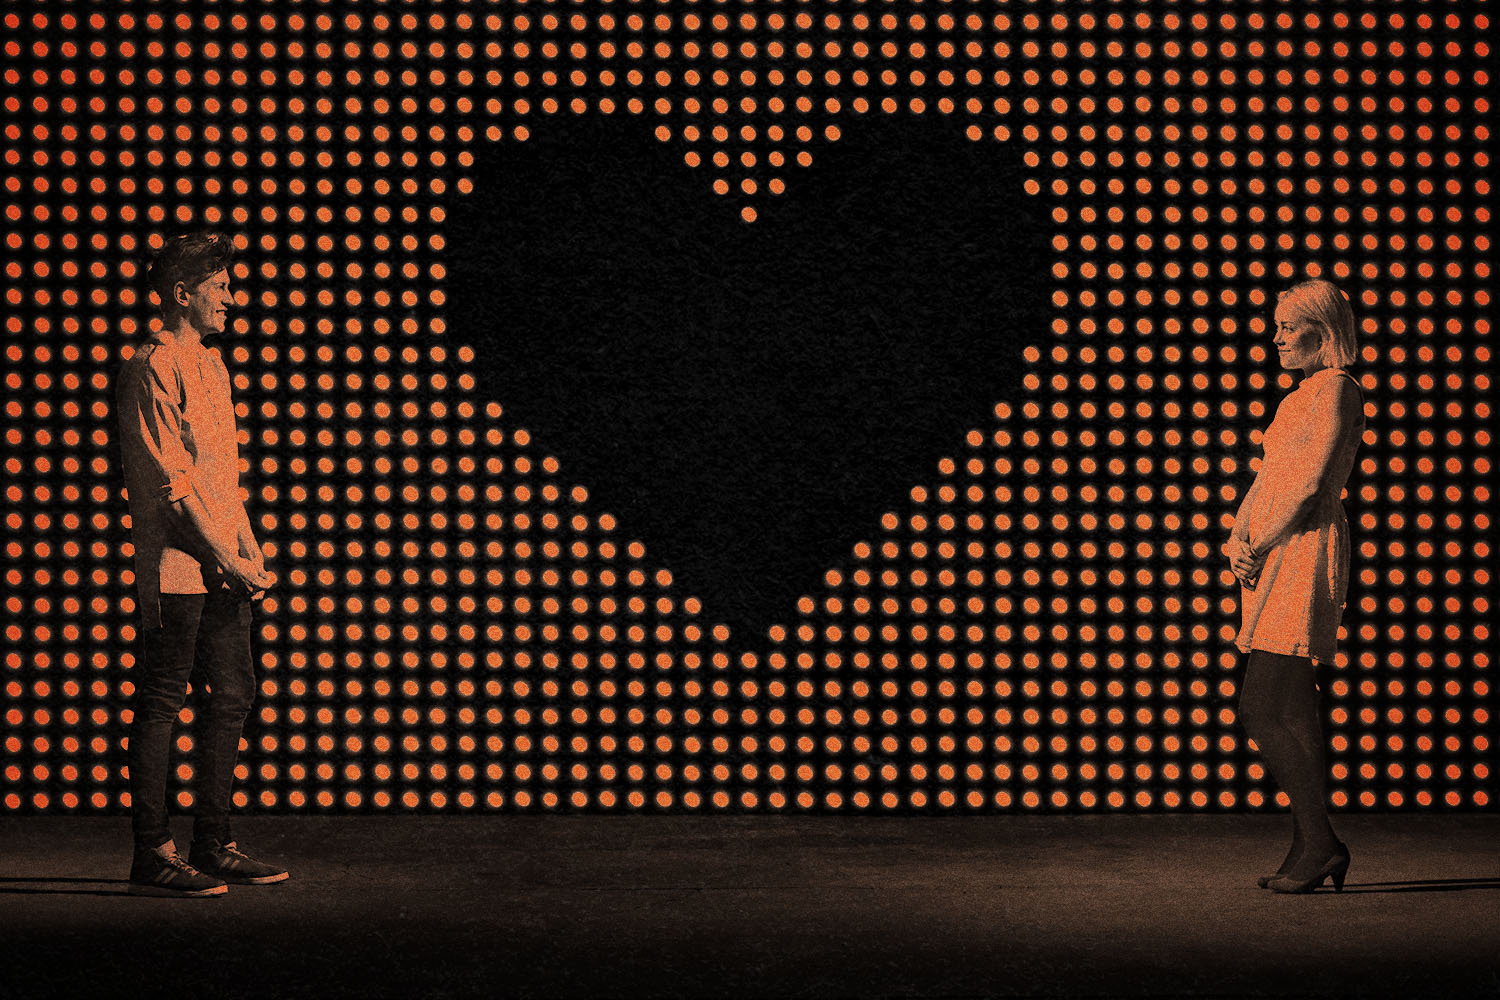 Two people stand far apart from each other on either side of a giant black heart background